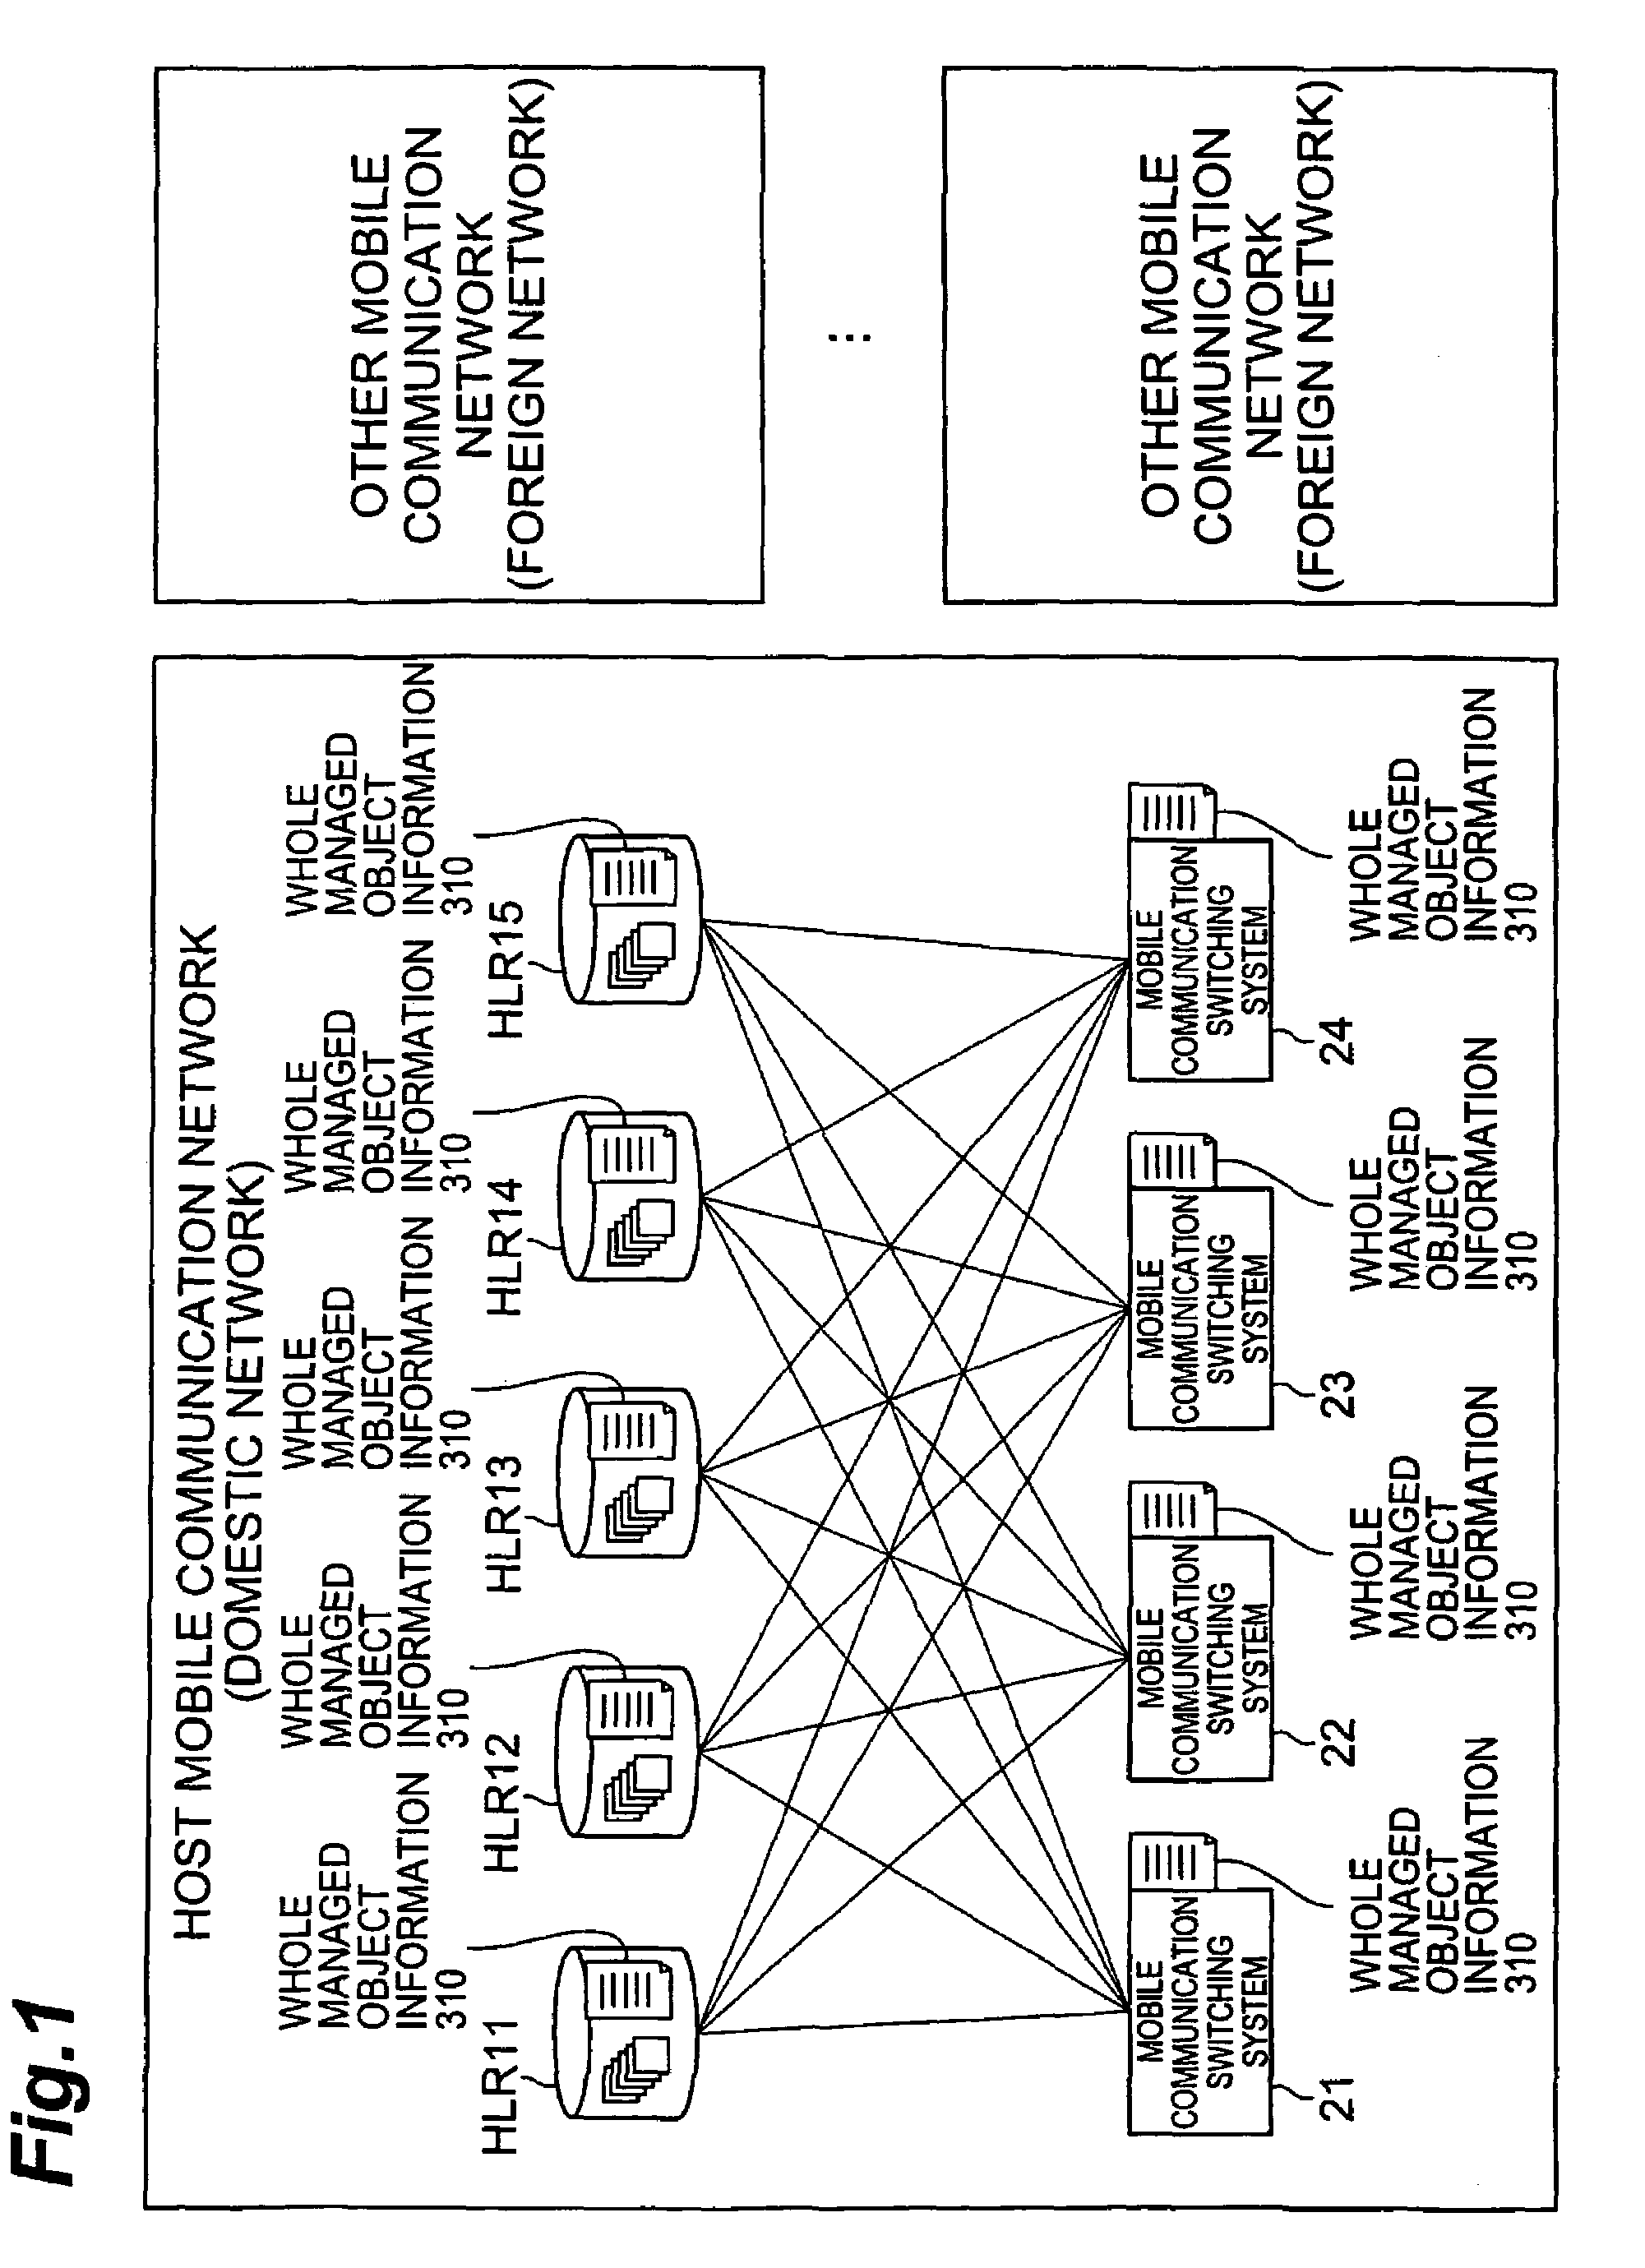 Location register and accommodation transfer control method